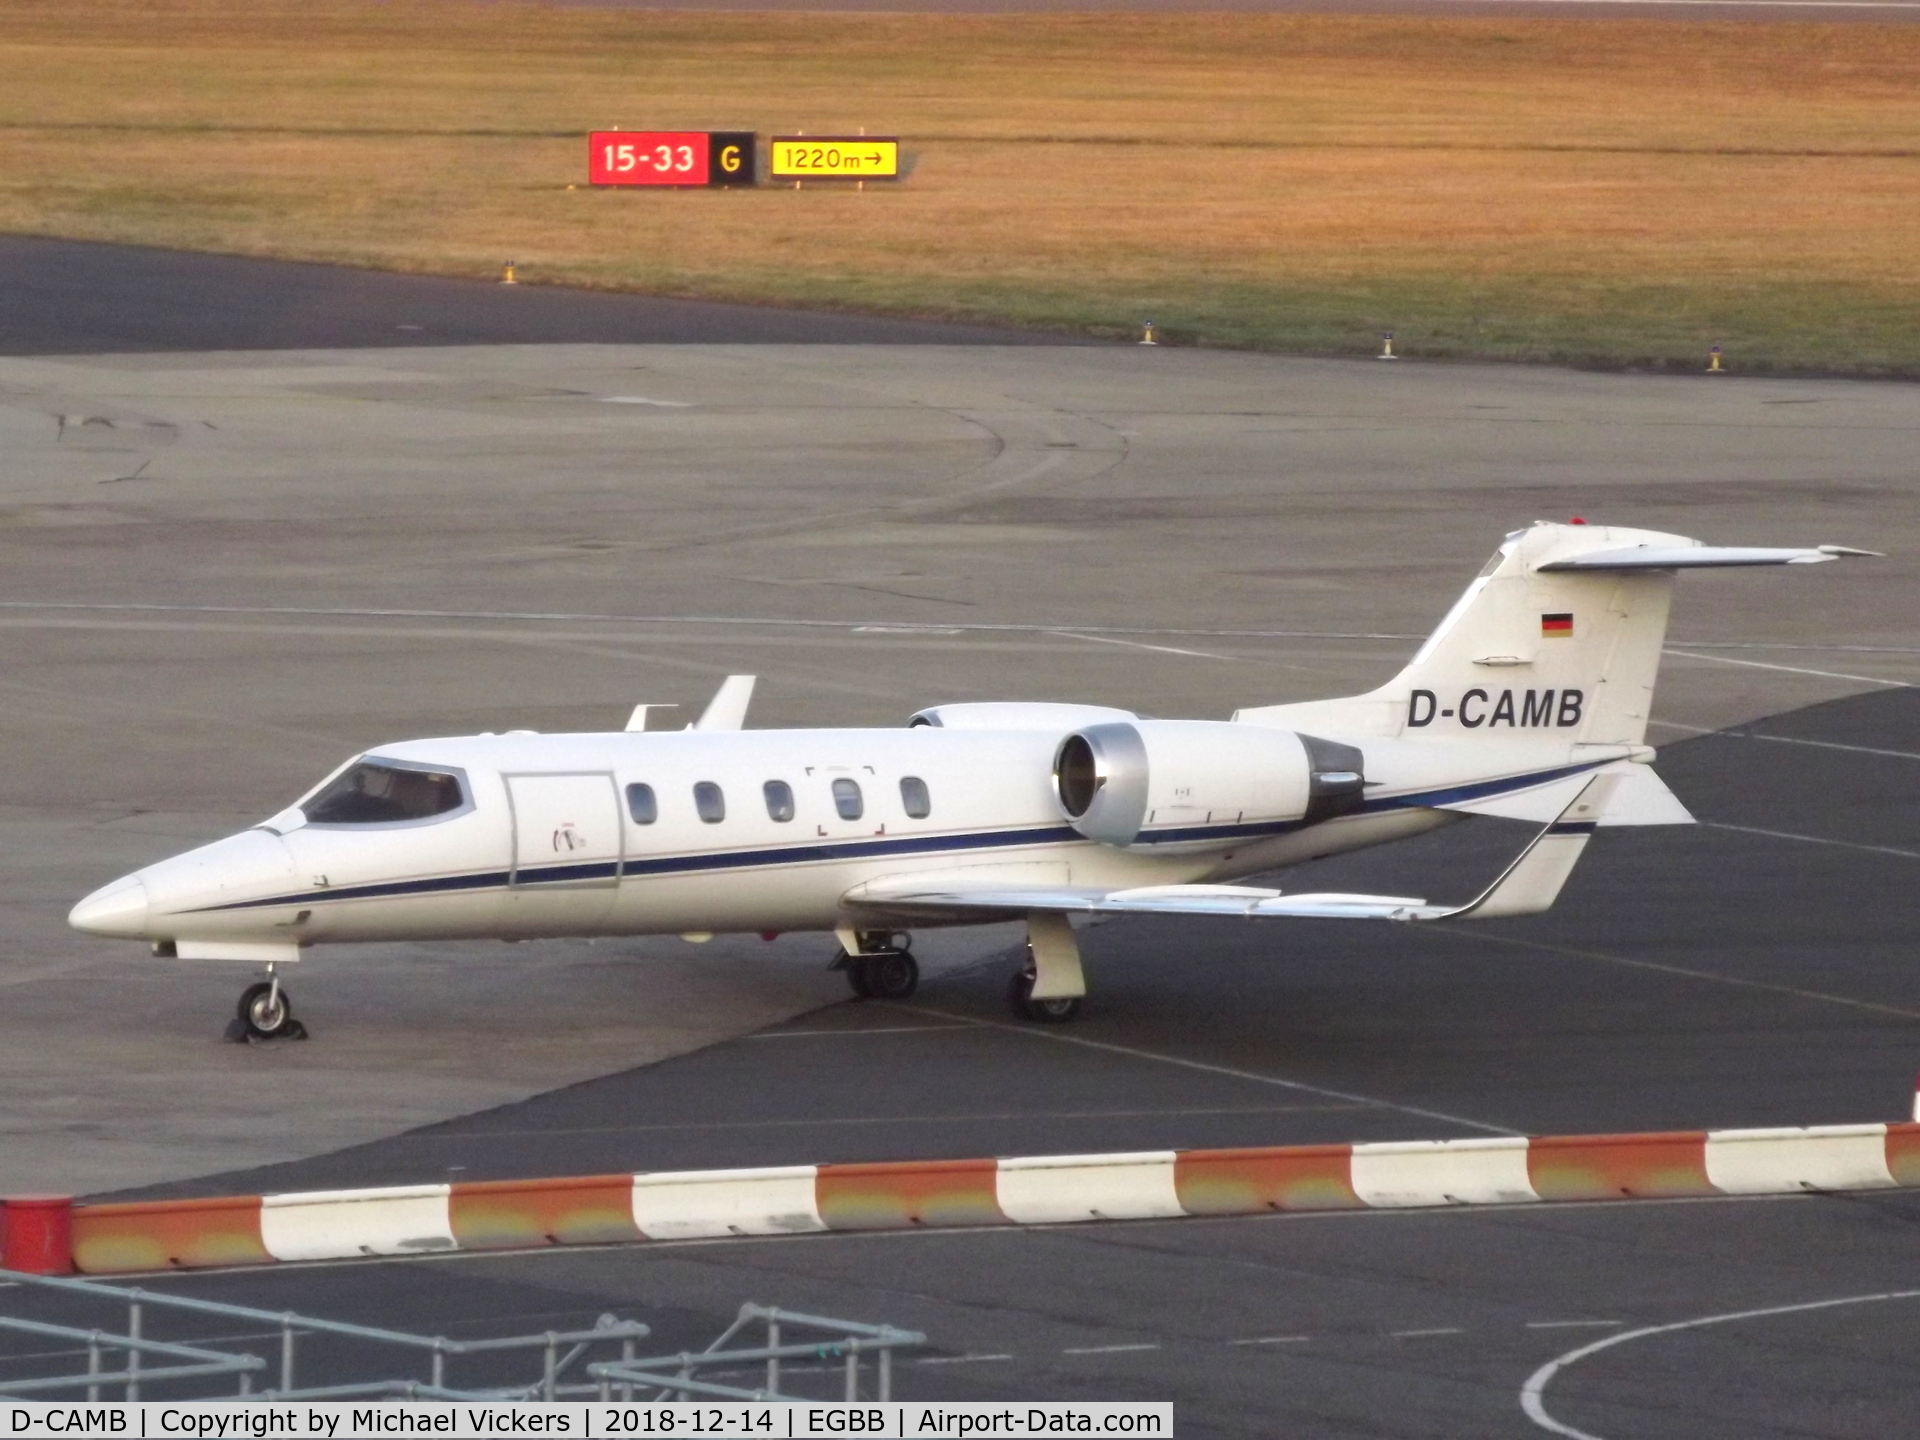 D-CAMB, 1998 Learjet 31A C/N 31-155, Parked on the elmdon apron